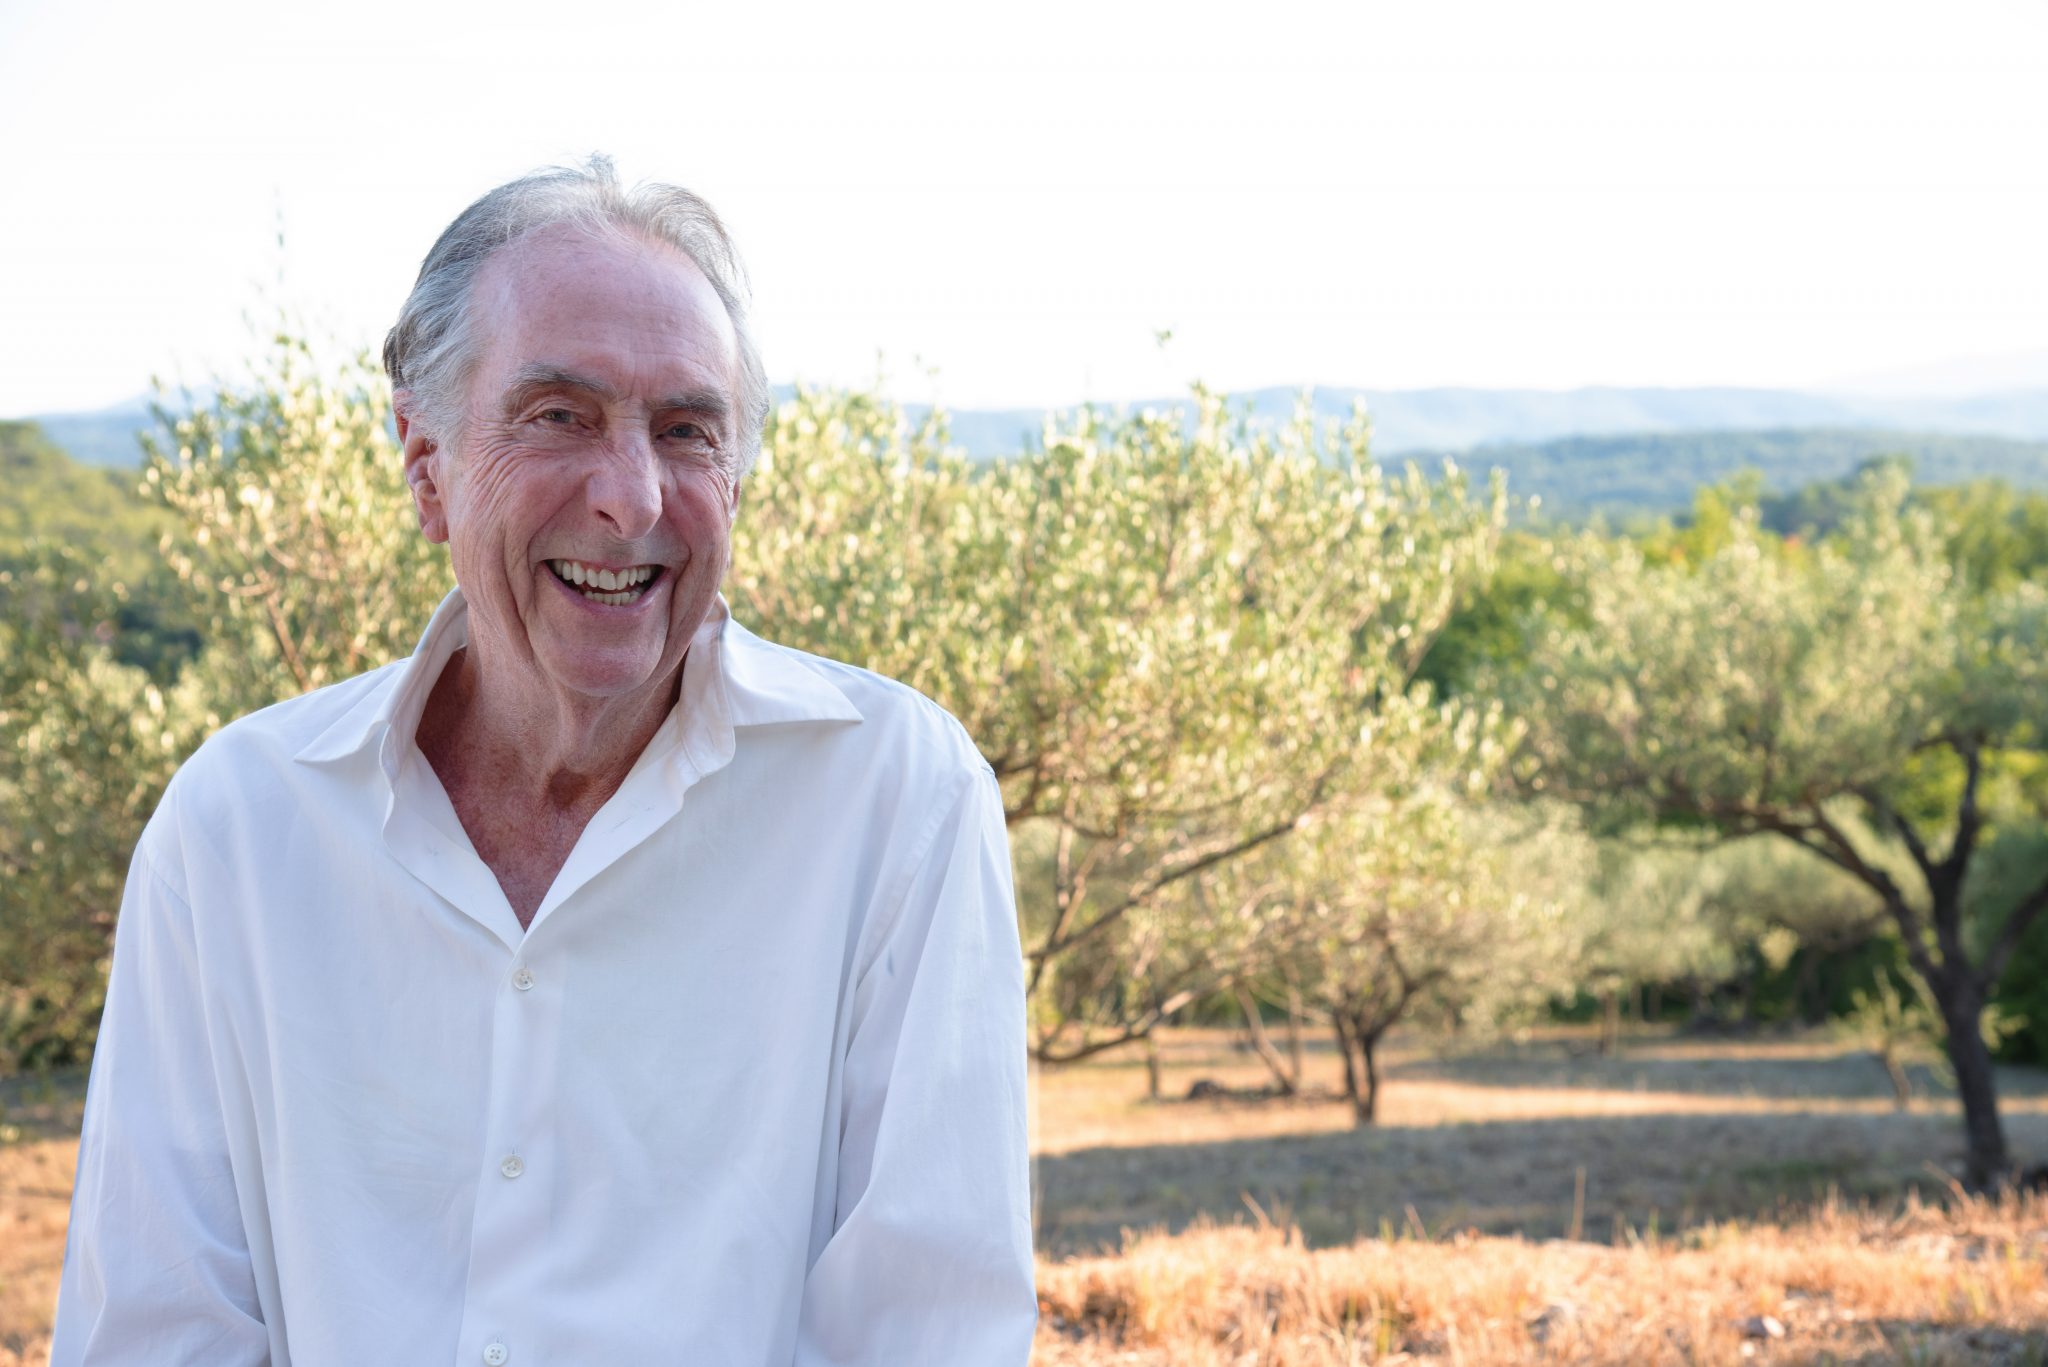 Monty Python's Eric Idle Survives Pancreatic Cancer After Early Detection